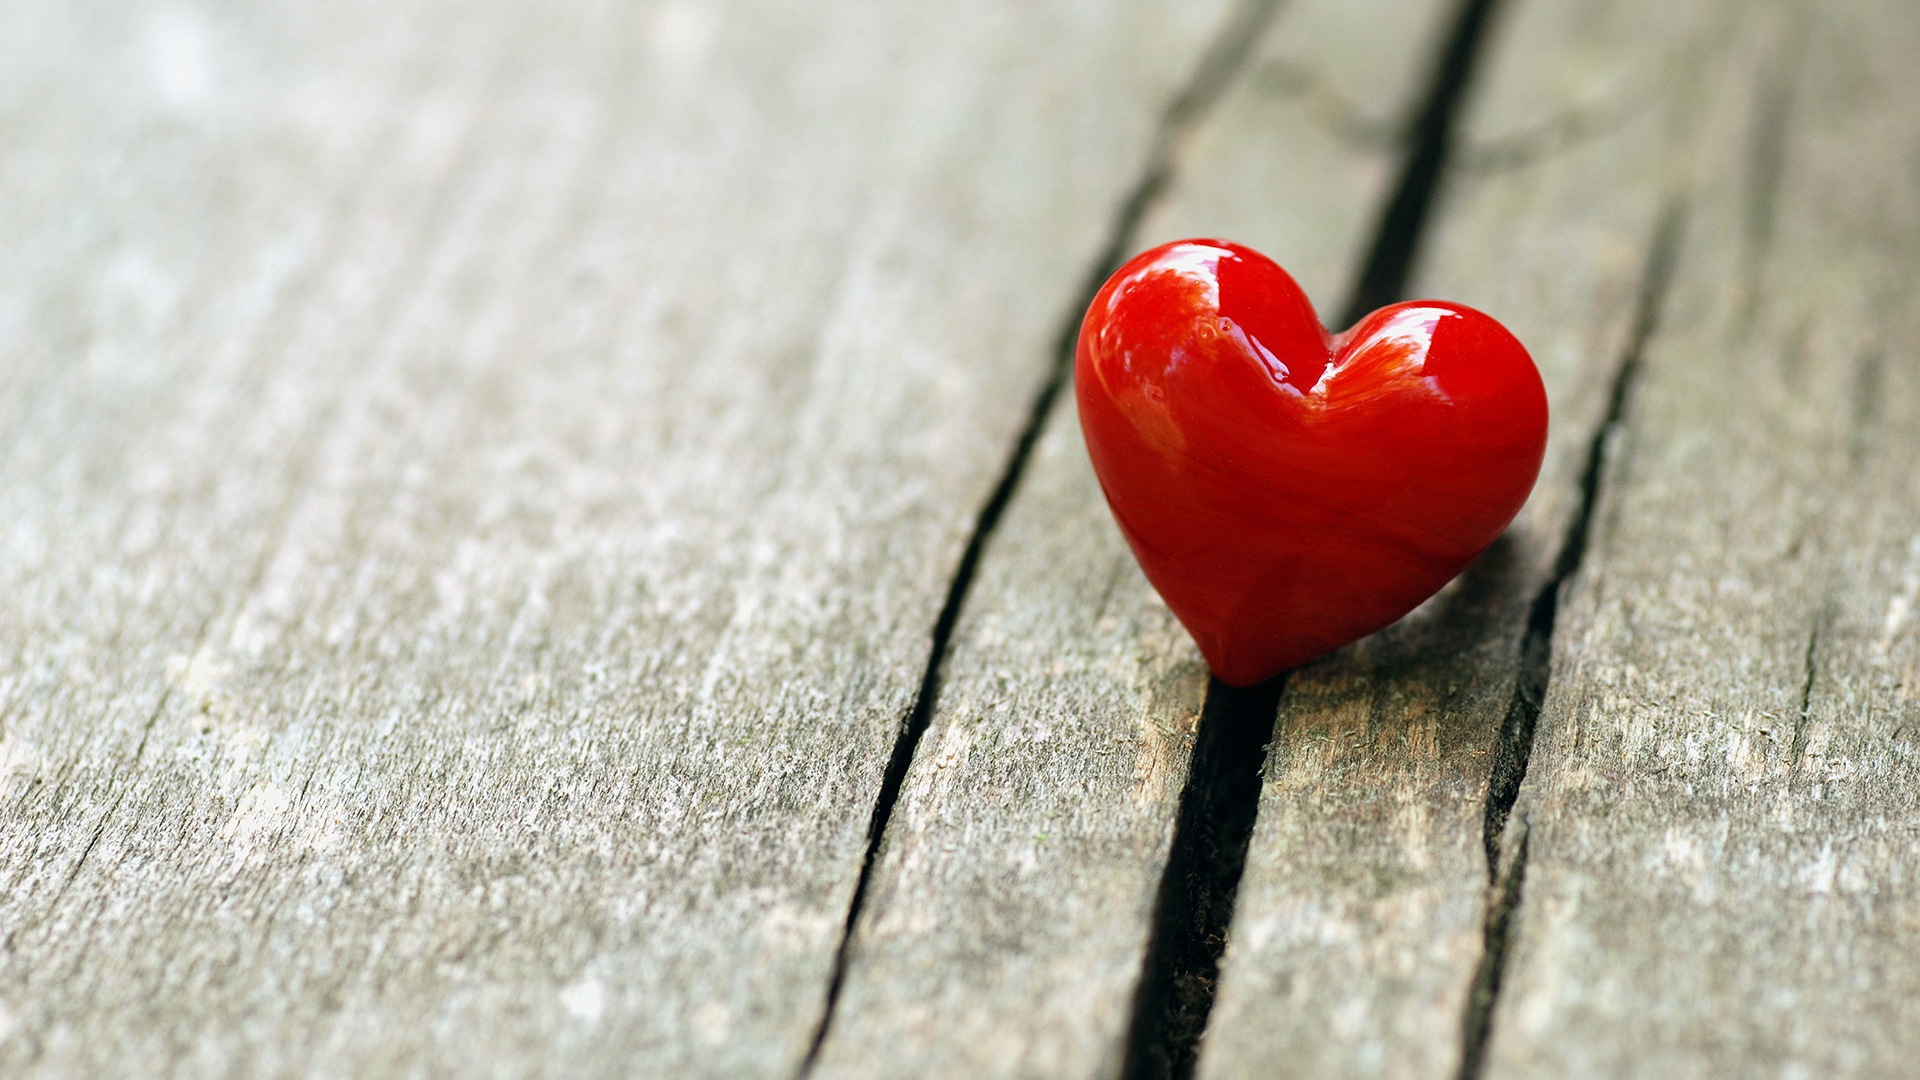 The theme of love, creative heart-shaped HD wallpapers #9 - 1920x1080